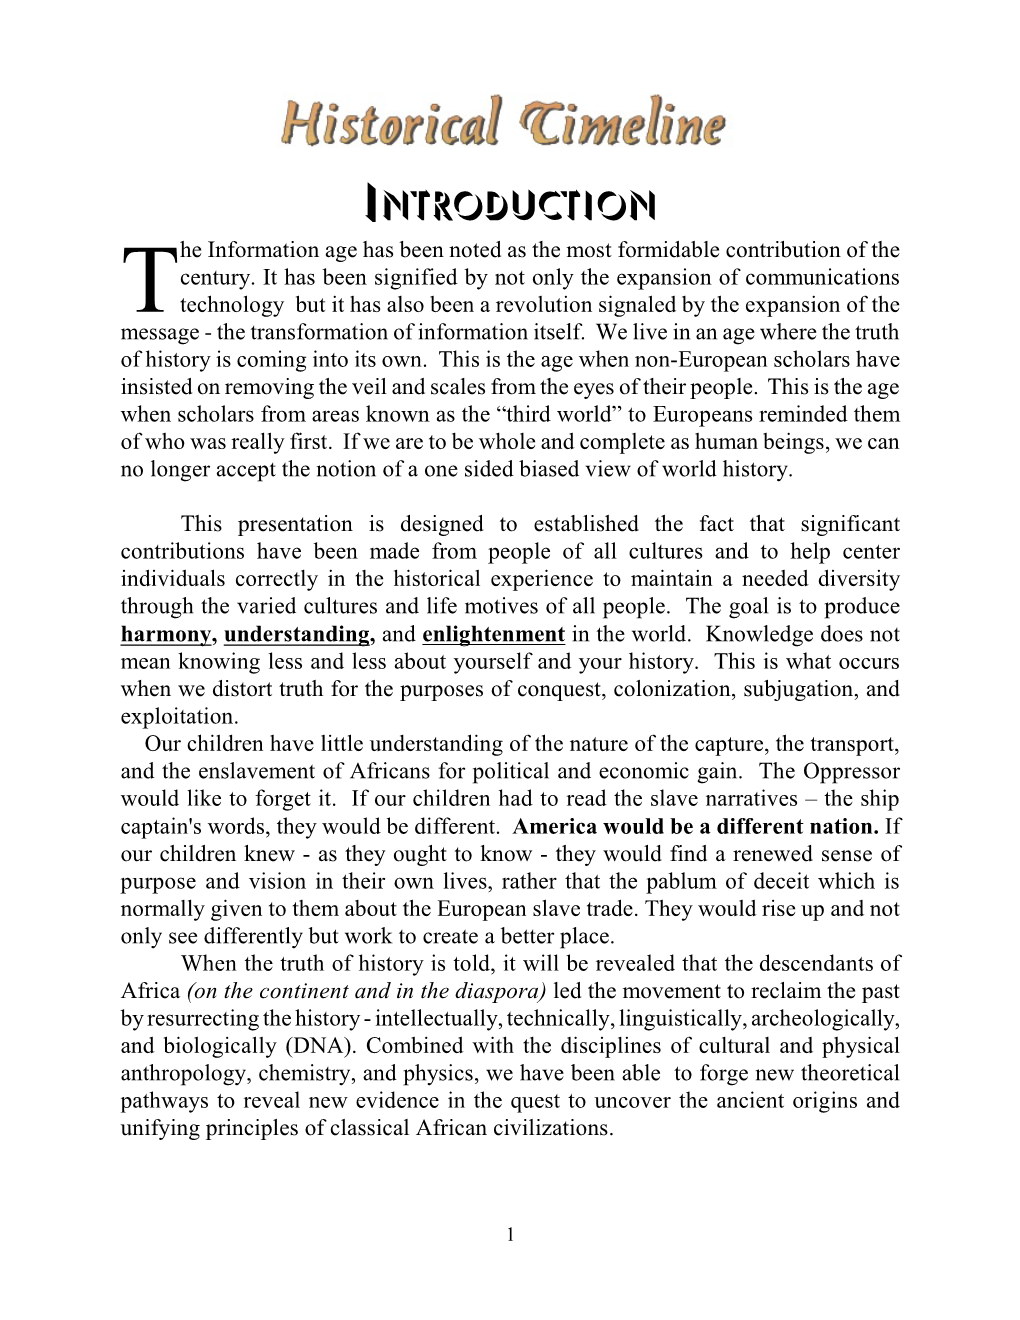 Introduction He Information Age Has Been Noted As the Most Formidable Contribution of the Century